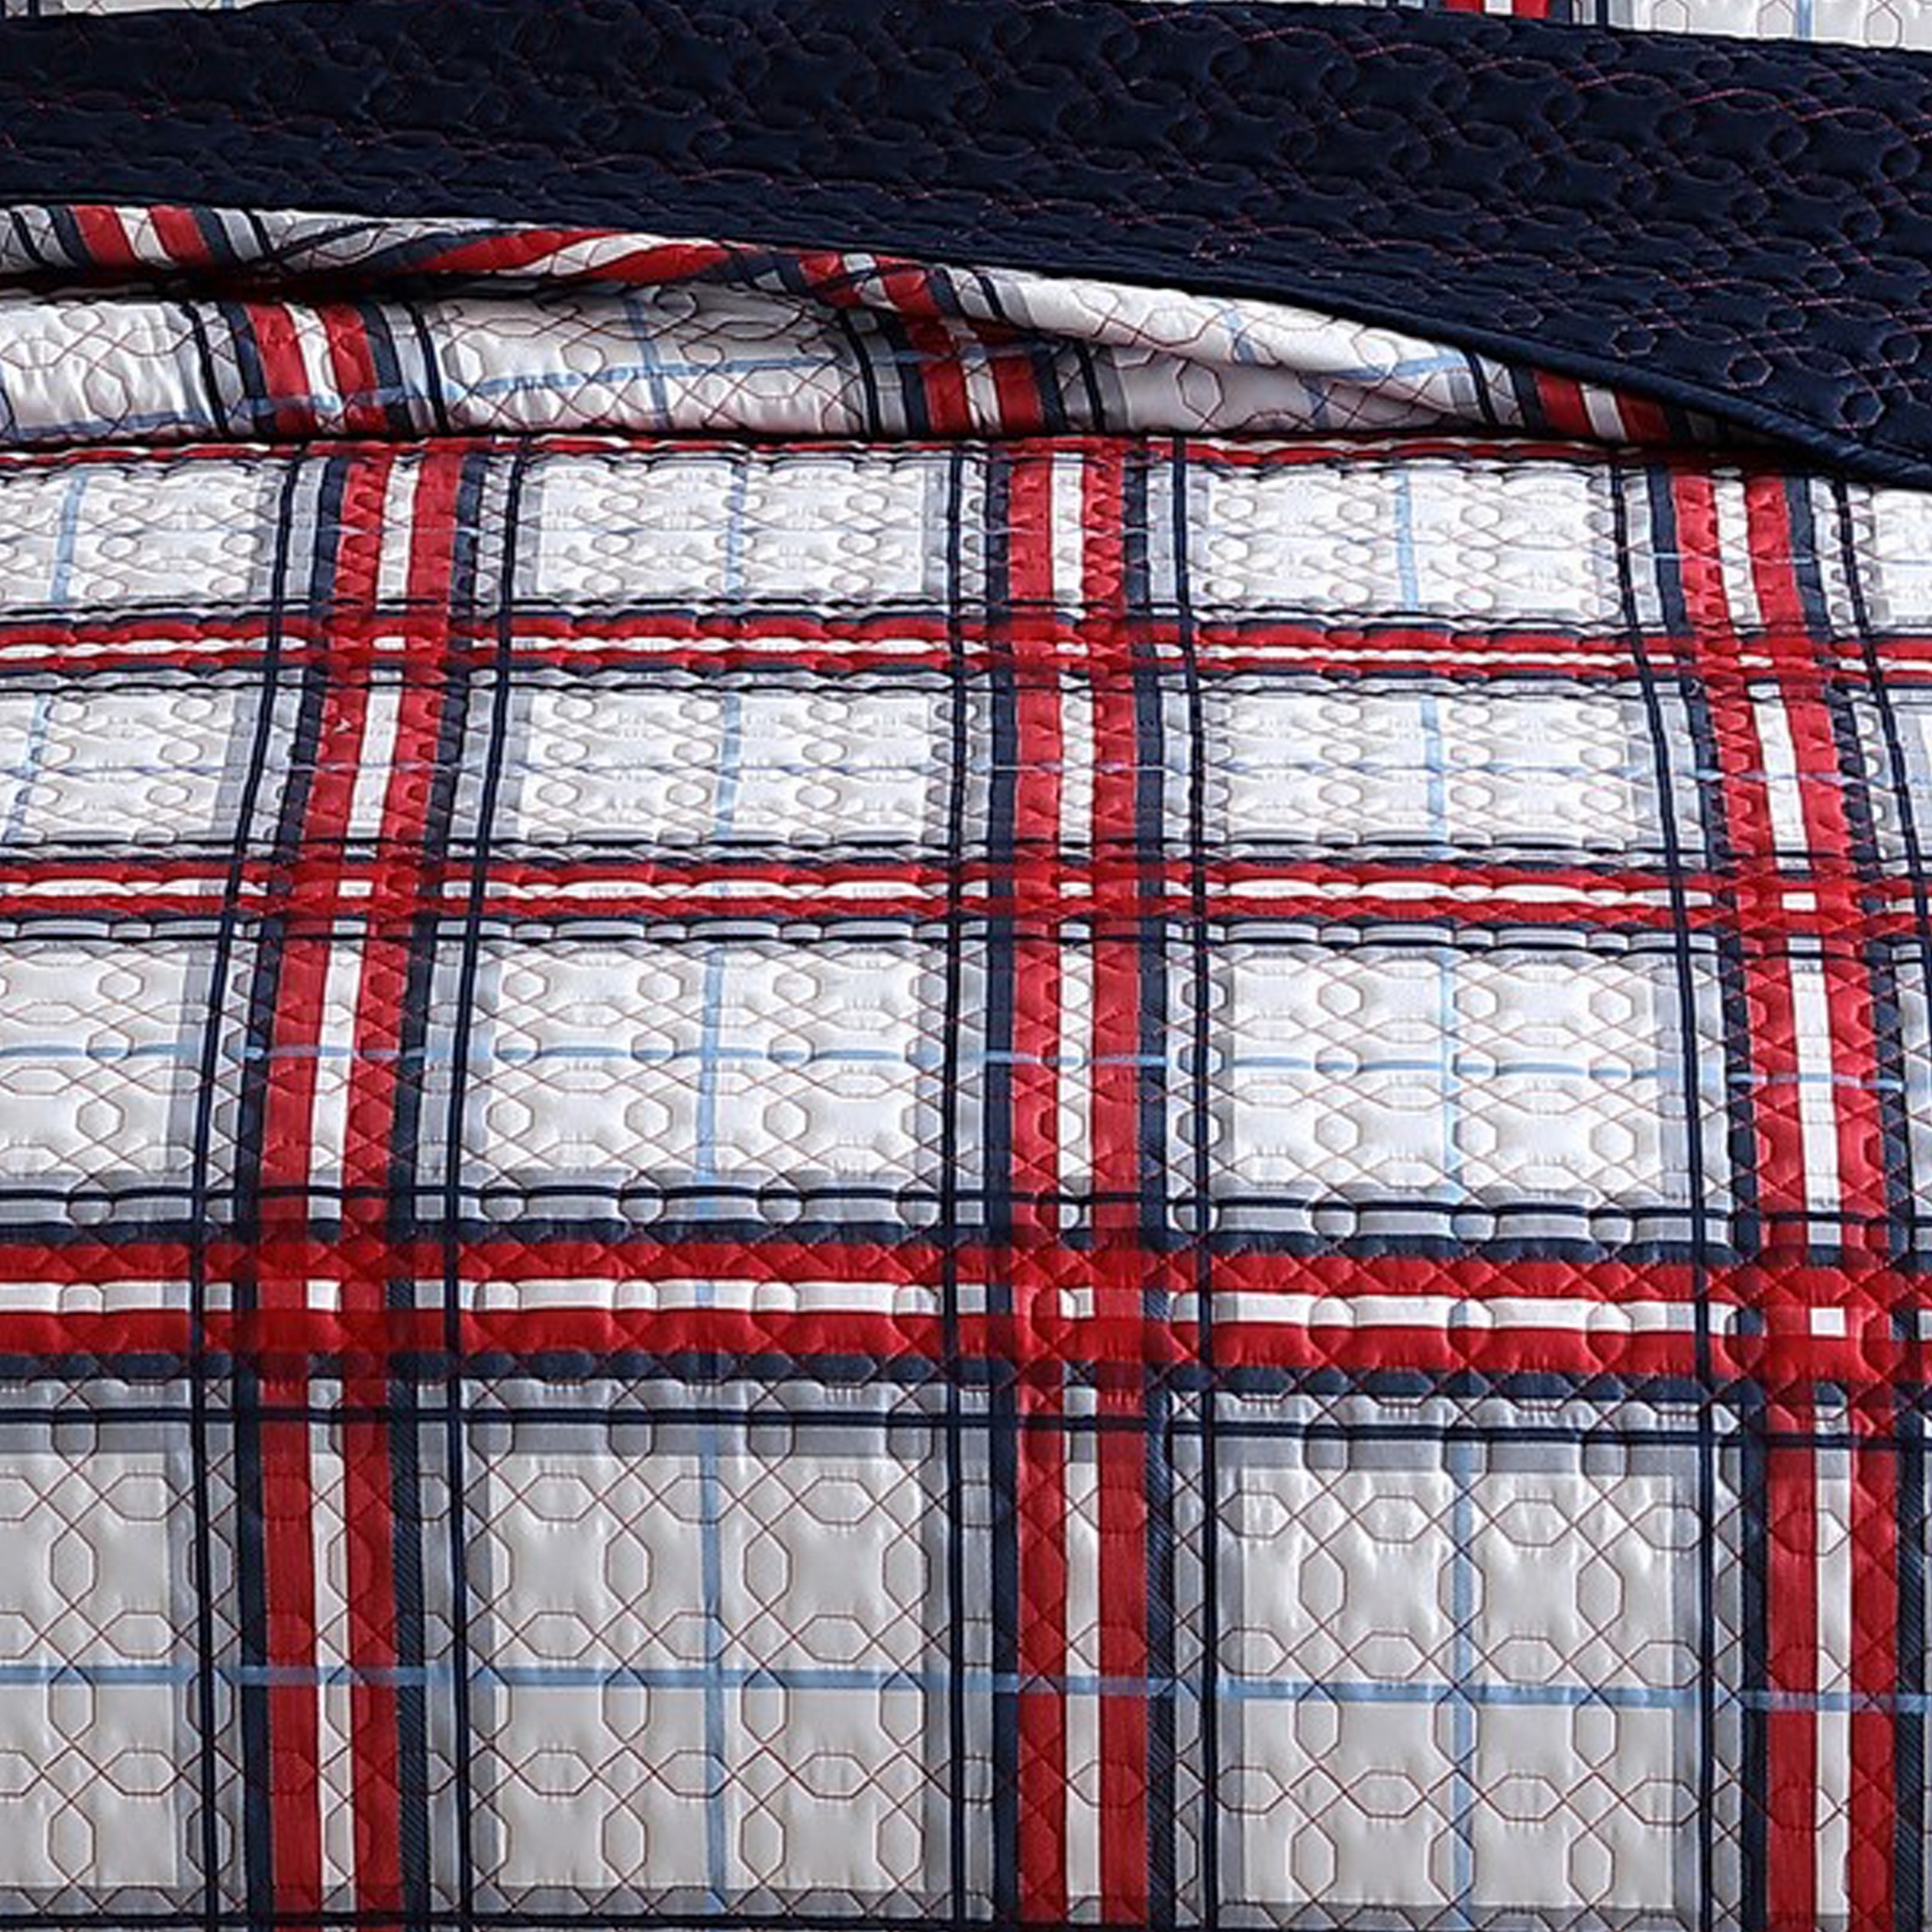 Ivy 3 Piece Full Queen Plaid Coverlet With Matching Shams, Red, White - Saltoro Sherpi